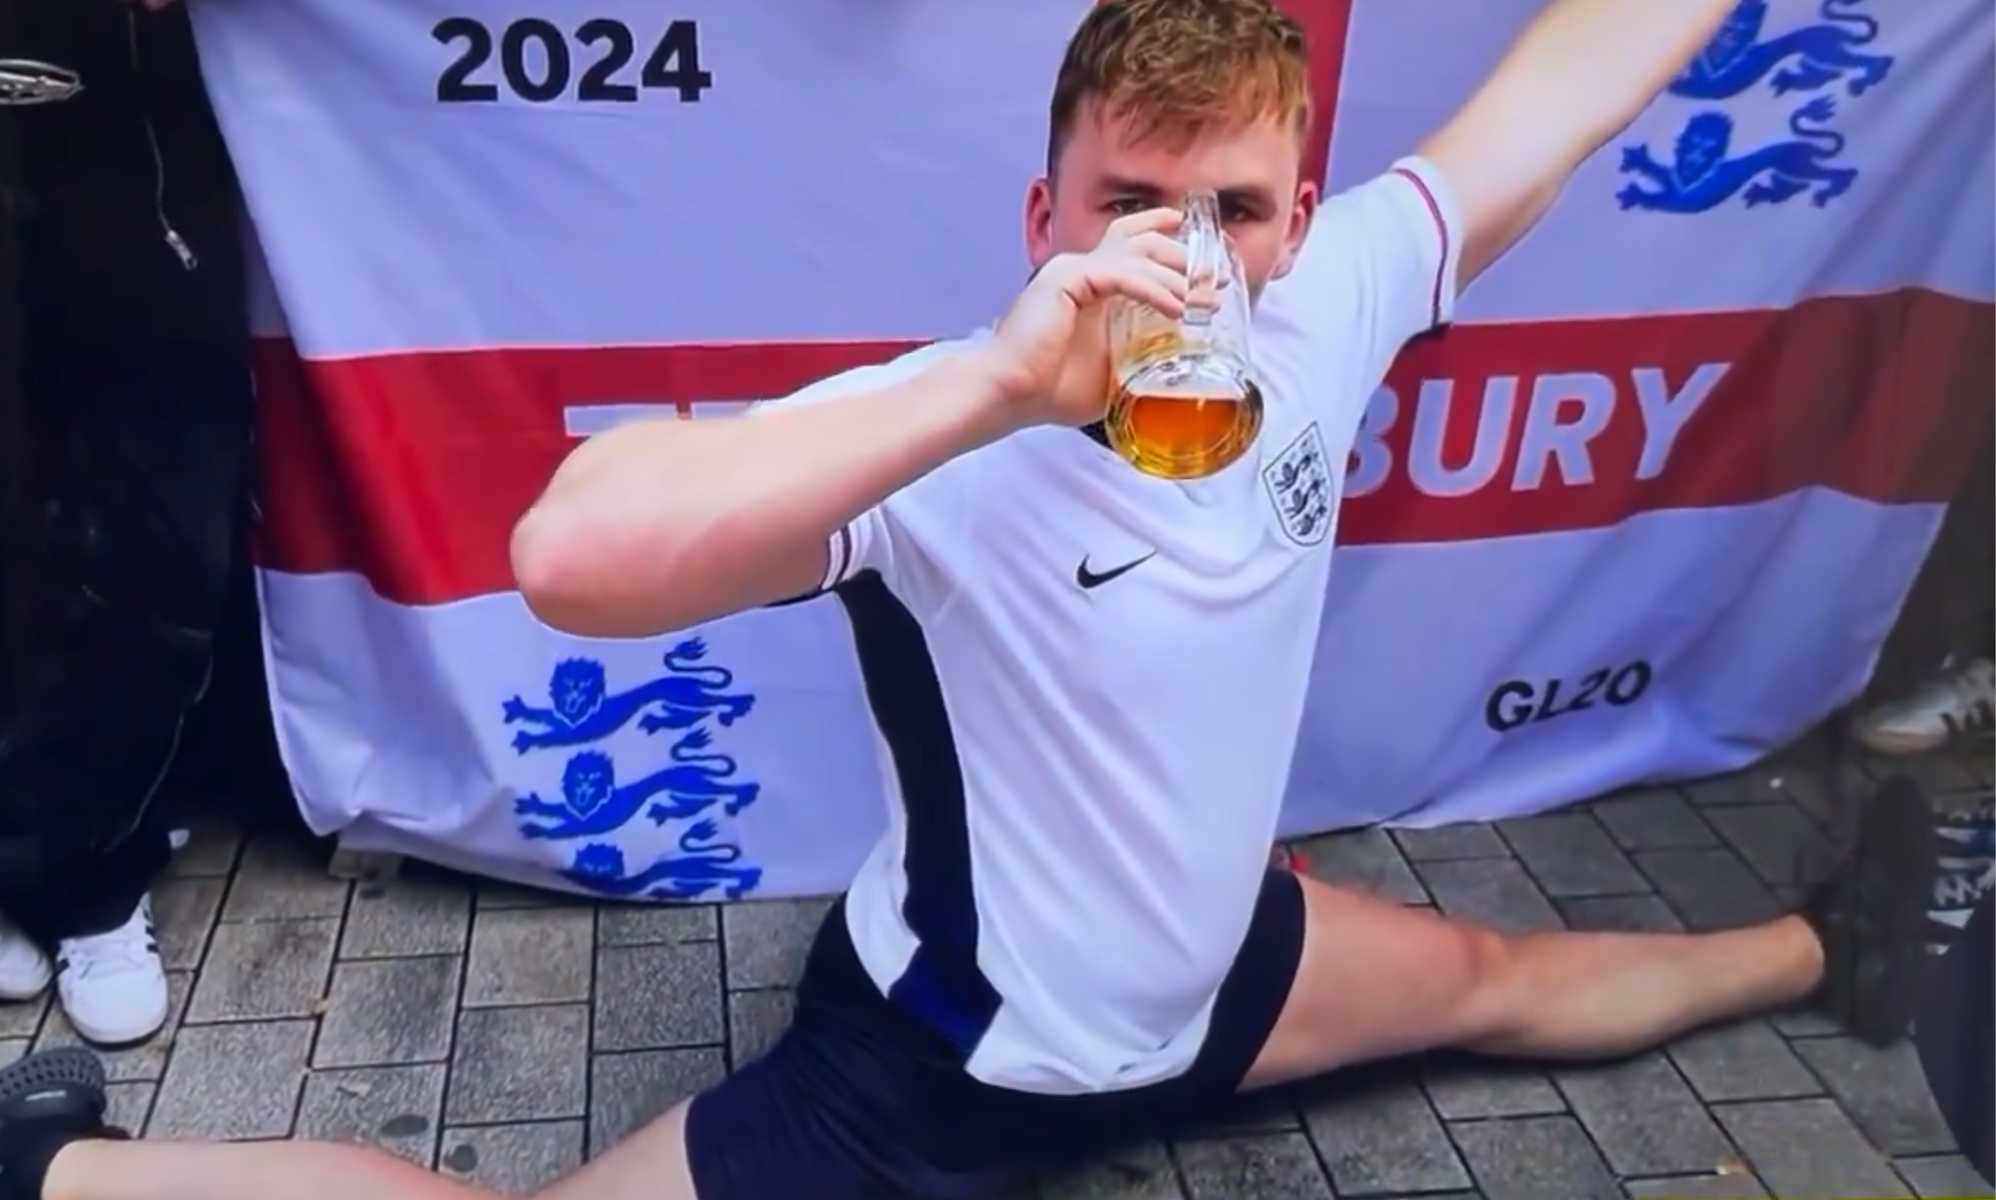 England football does splits and downs pint watching Euro 2024